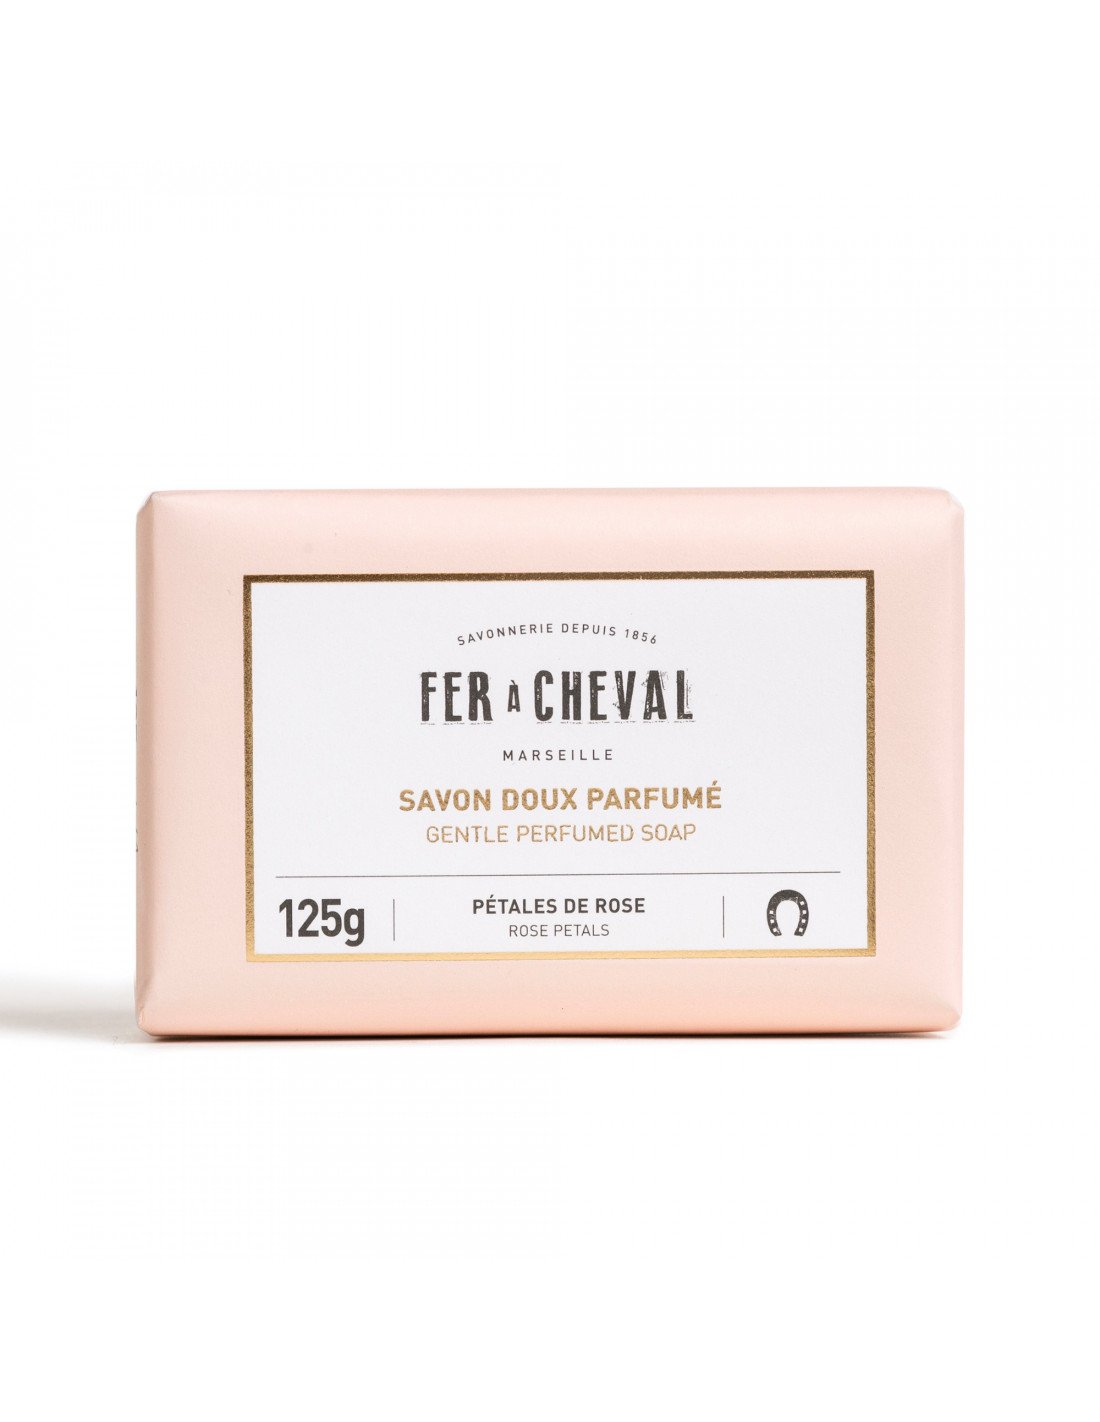 Soap 125g ROSE PETALS with argan oil and shea butter, FAS